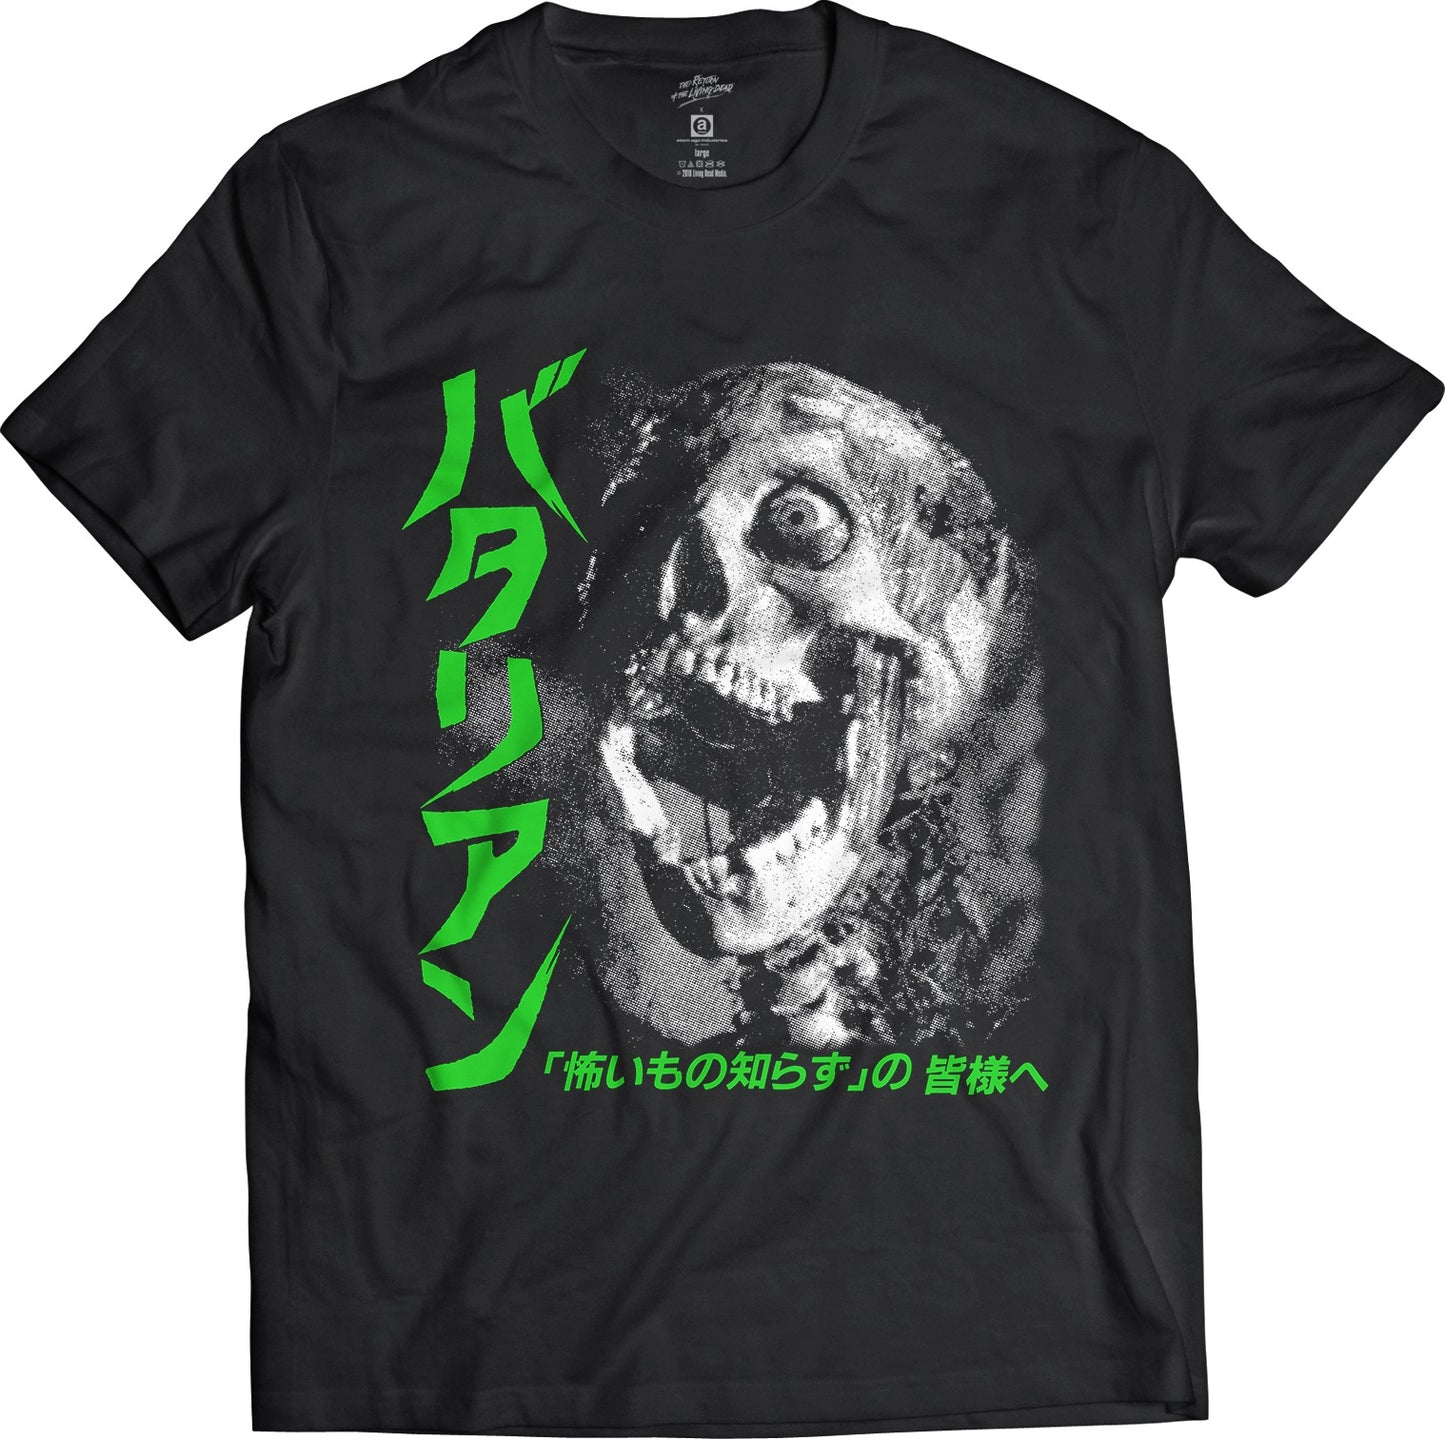 Atom Age Industries - The Return of the Living Dead Corpse T-Shirt